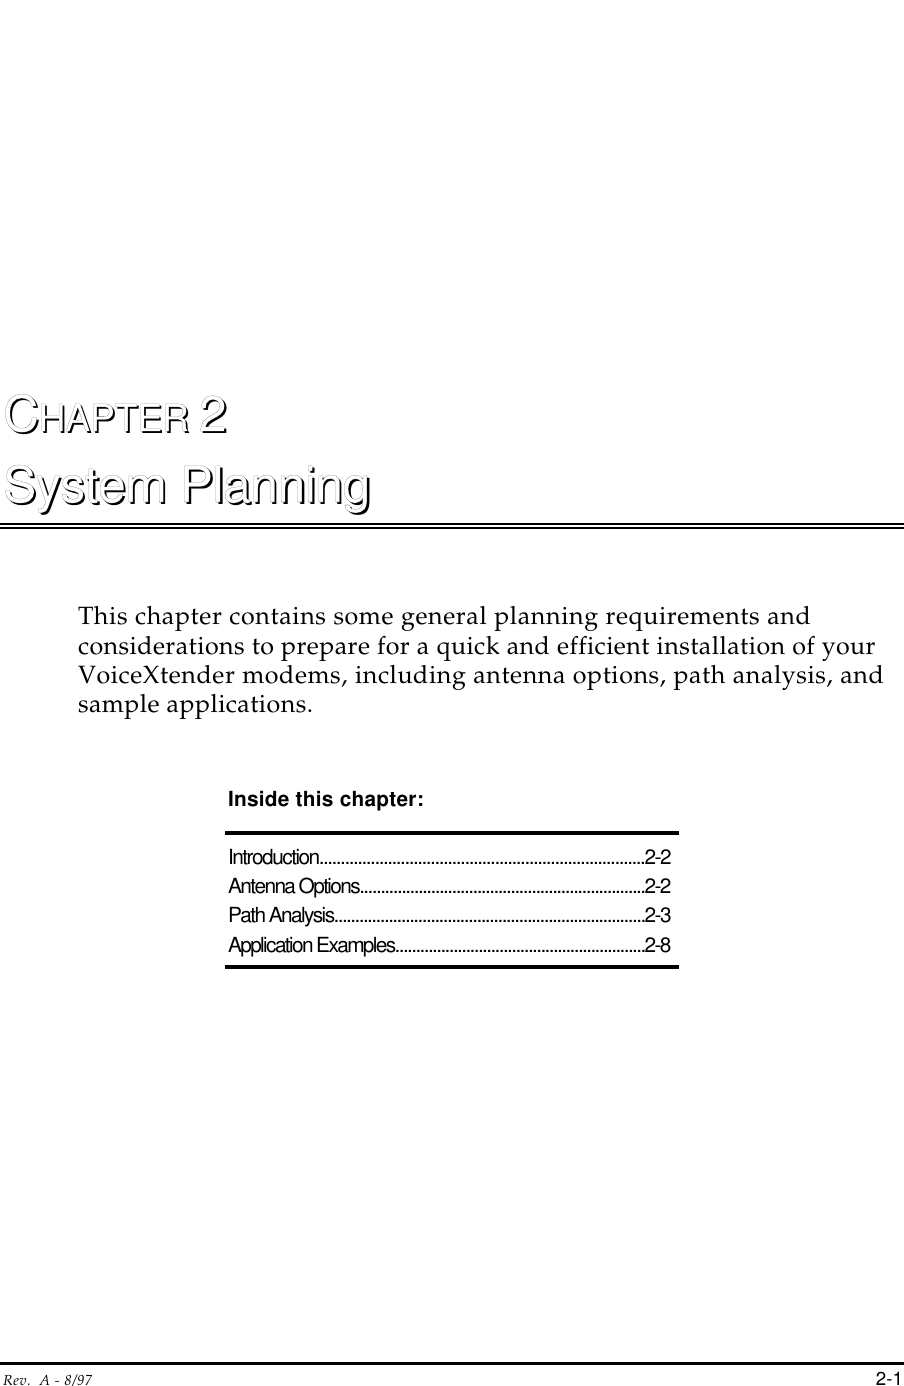 Rev.  A - 8/97 2-1CCHAPTER HAPTER 22System PlanningSystem PlanningThis chapter contains some general planning requirements andconsiderations to prepare for a quick and efficient installation of yourVoiceXtender modems, including antenna options, path analysis, andsample applications.   Inside this chapter:Introduction............................................................................2-2Antenna Options....................................................................2-2Path Analysis..........................................................................2-3Application Examples............................................................2-8